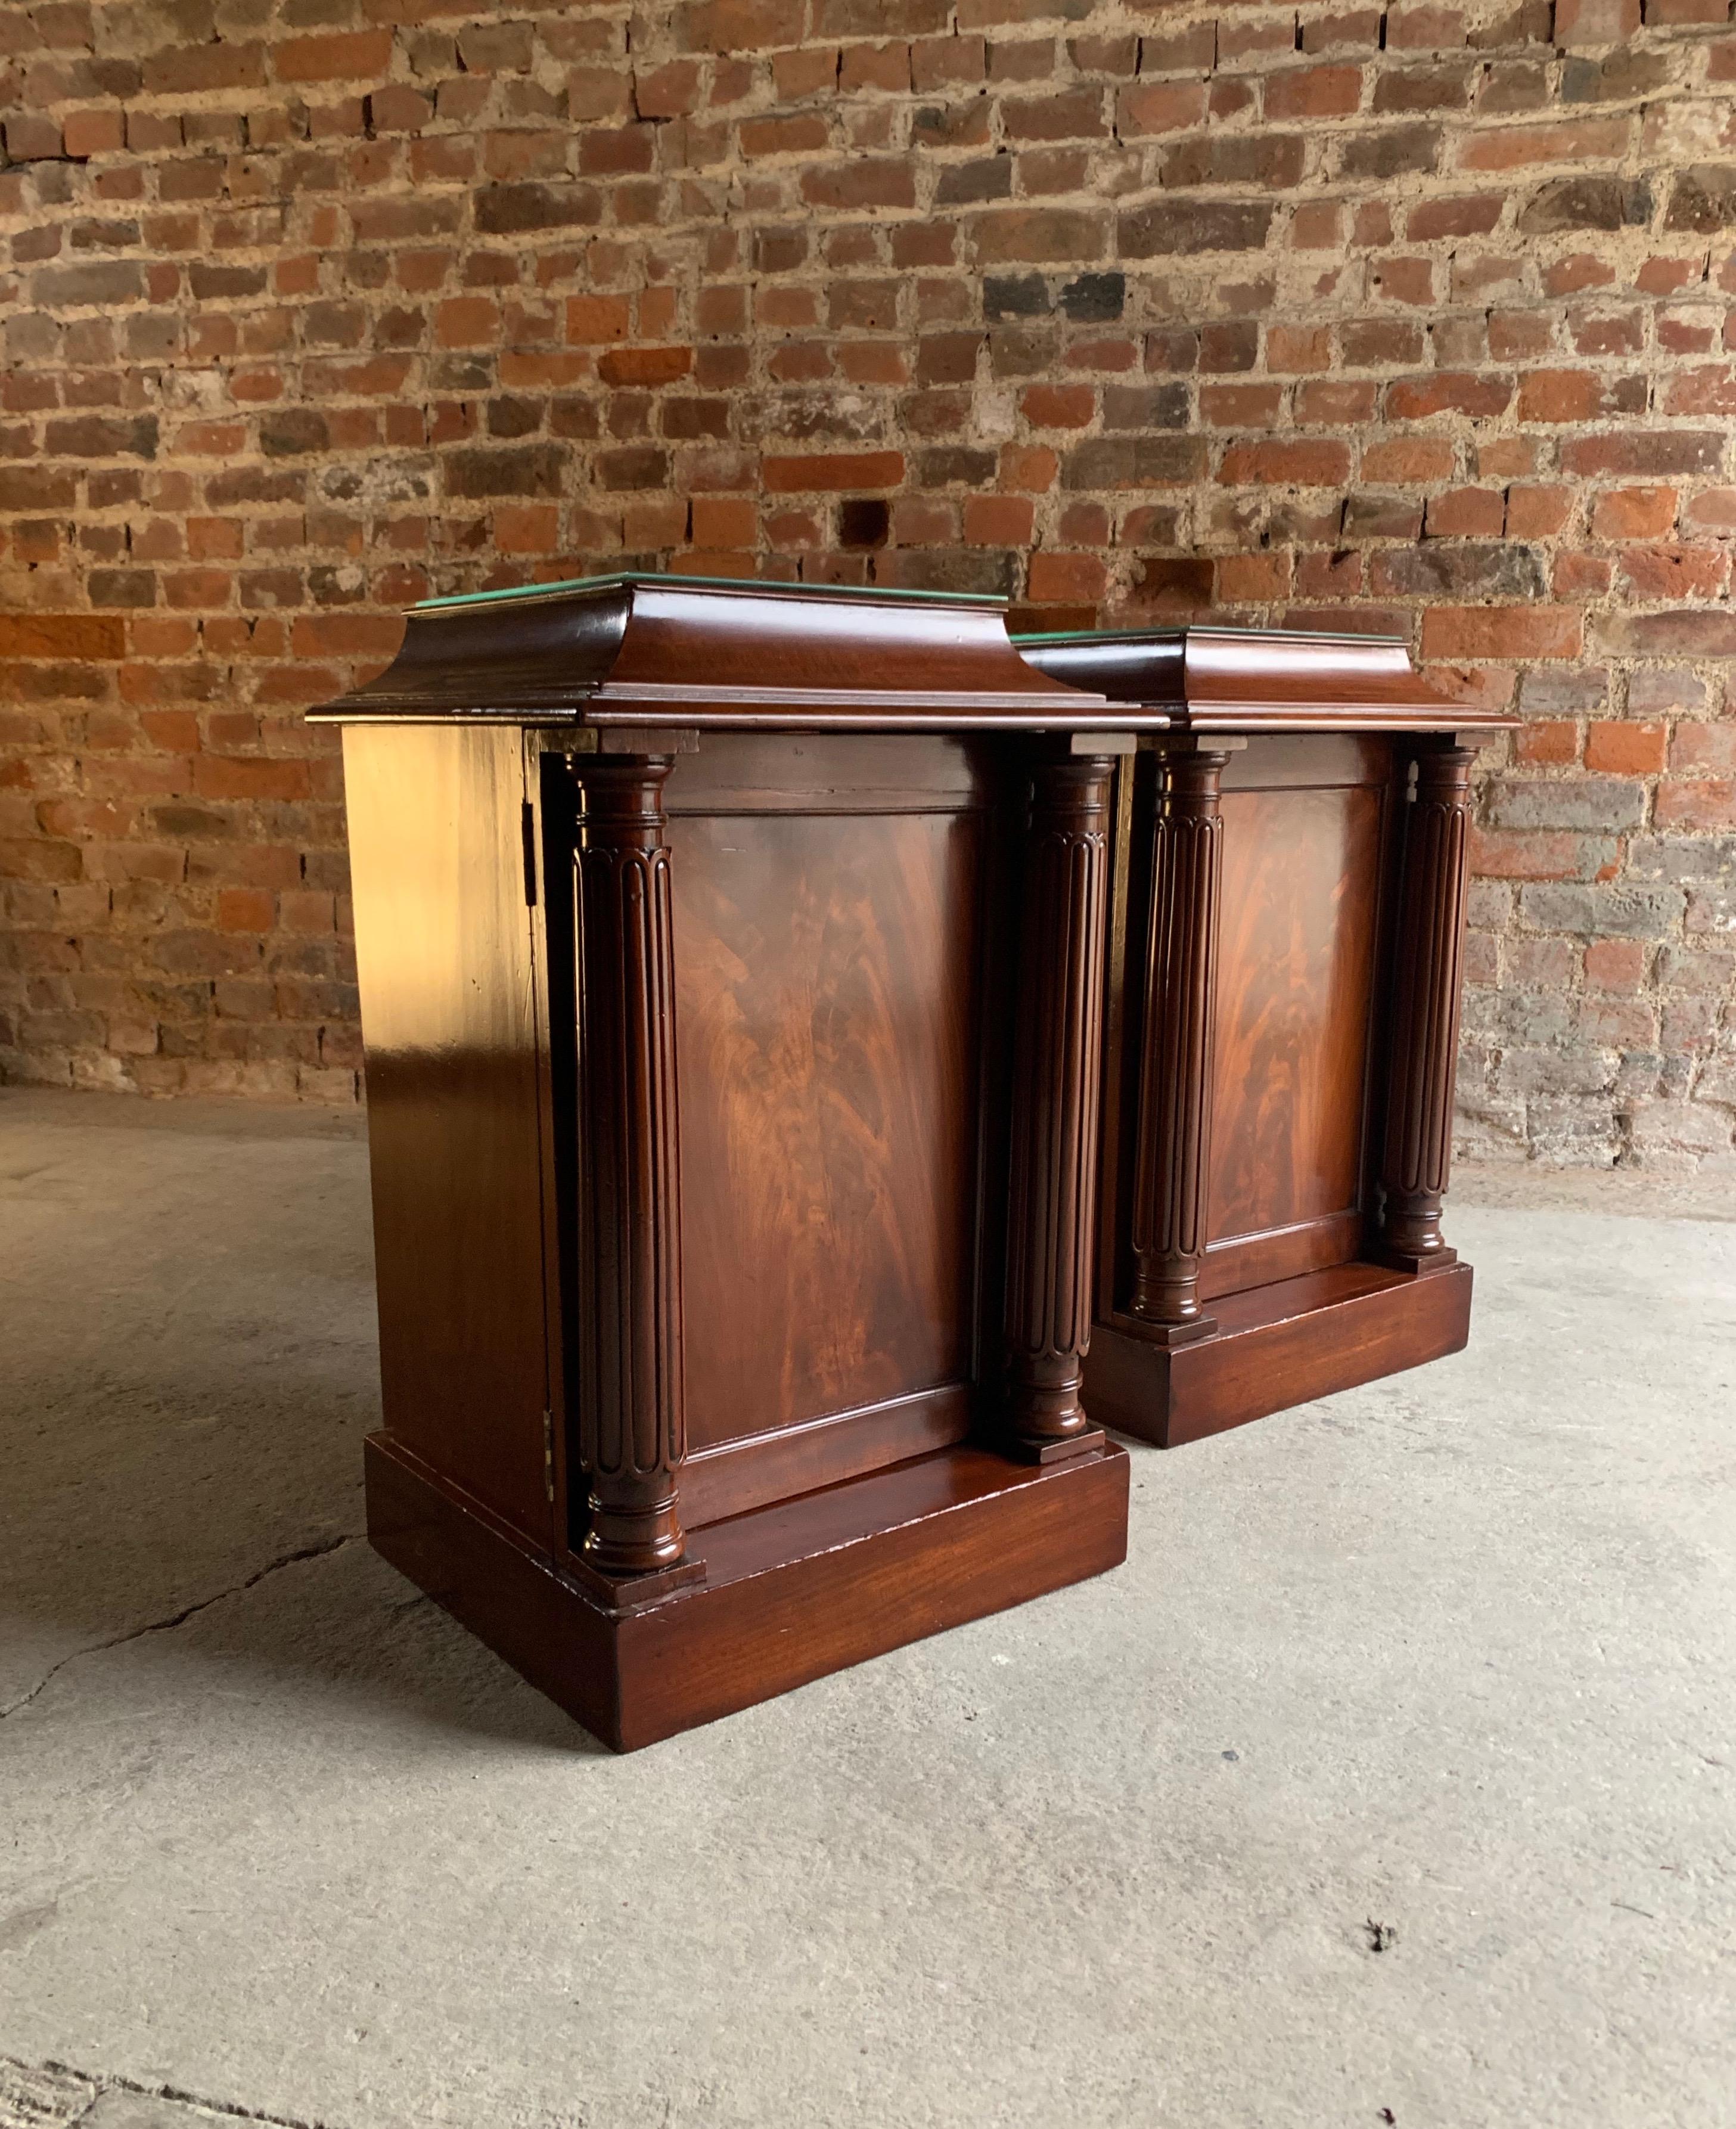 A stunning and very grand pair of antique mid-19th century flame fronted mahogany bedside cabinets Victorian circa 1850, the rectangular tops each with beveled glass over left and right opening flamed mahogany doors, one with a single shelf and the